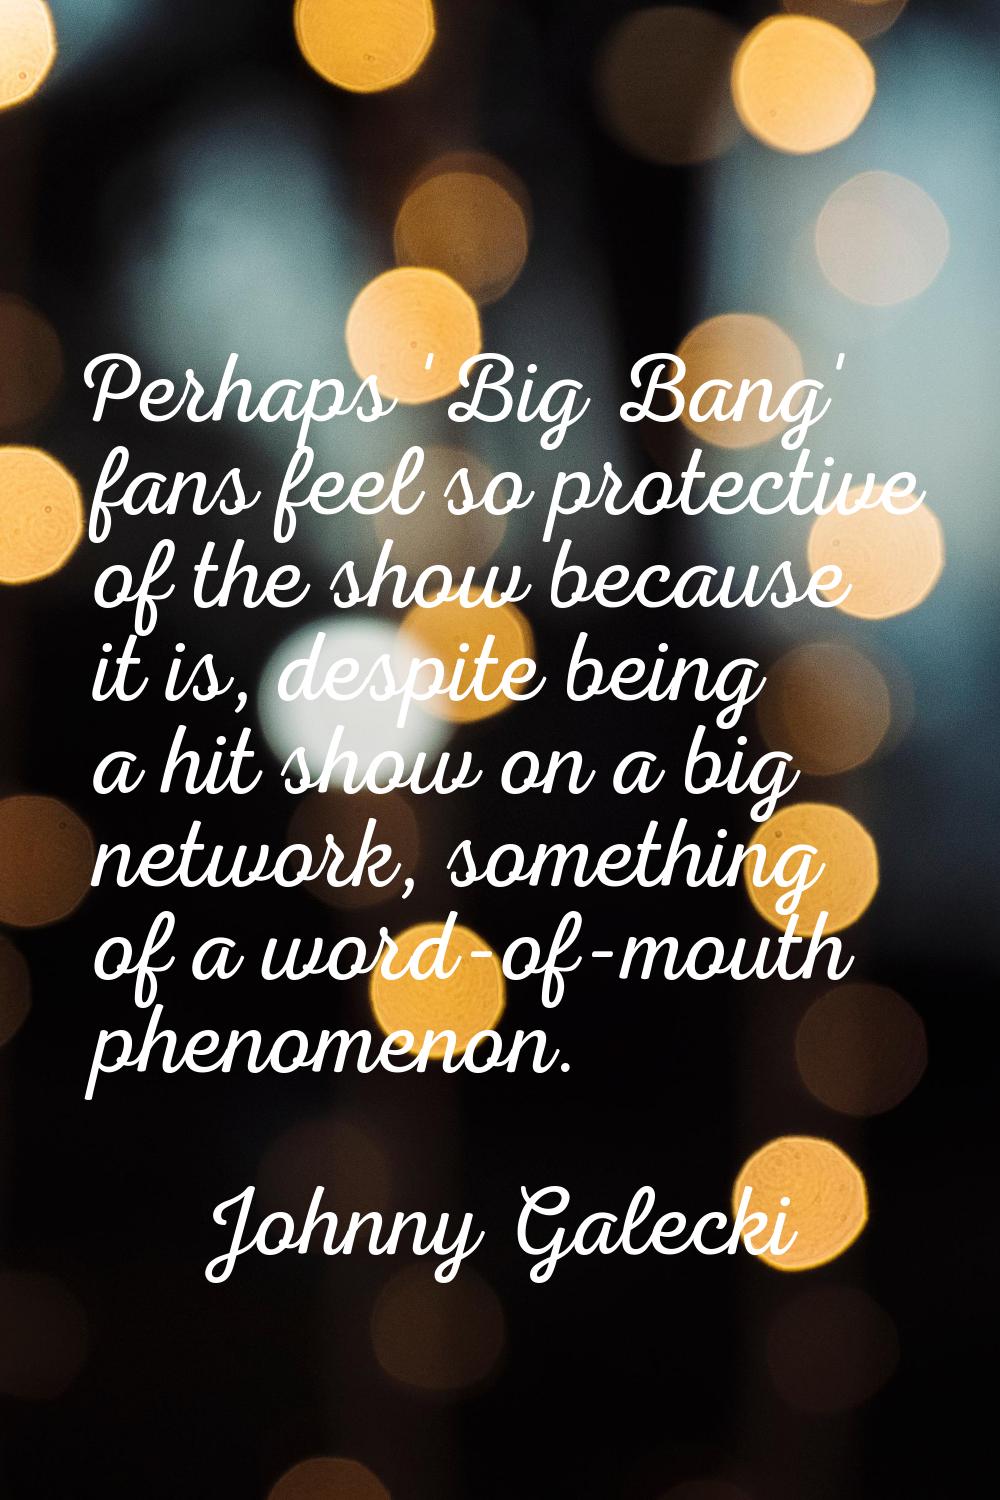 Perhaps 'Big Bang' fans feel so protective of the show because it is, despite being a hit show on a